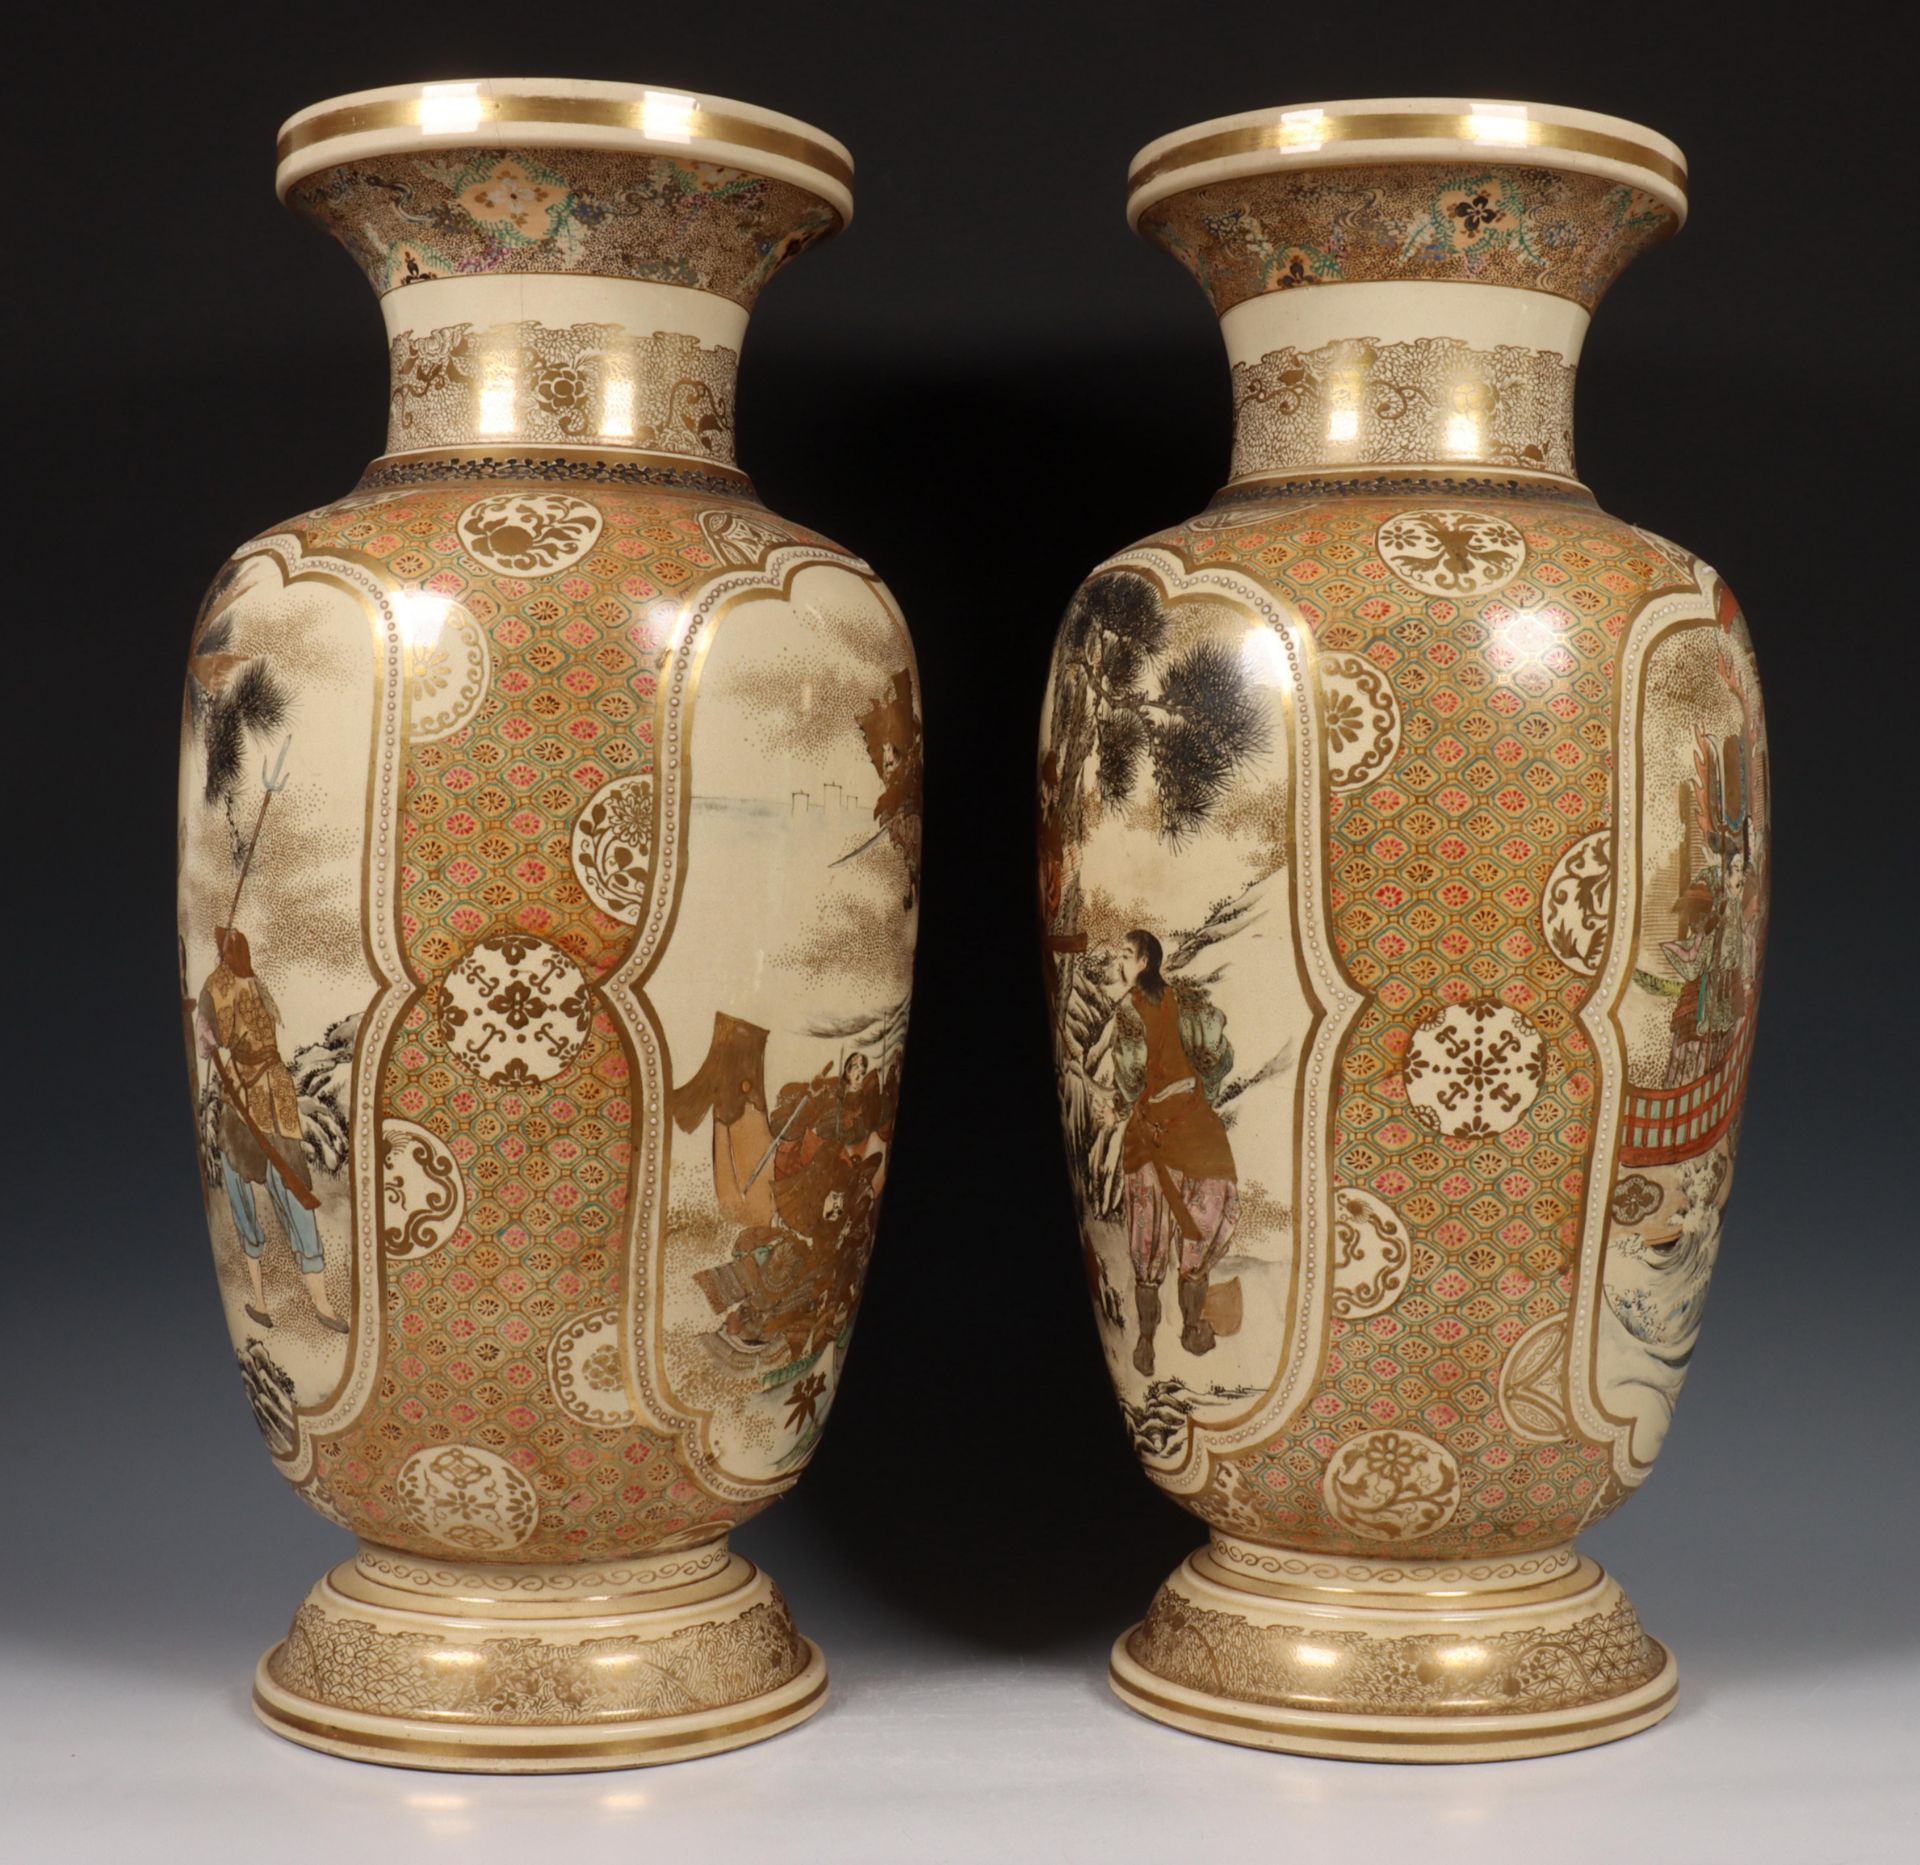 Japan, two Satsuma baluster vases, late 19th century, variously decorated with scenes of Samurai - Image 2 of 7